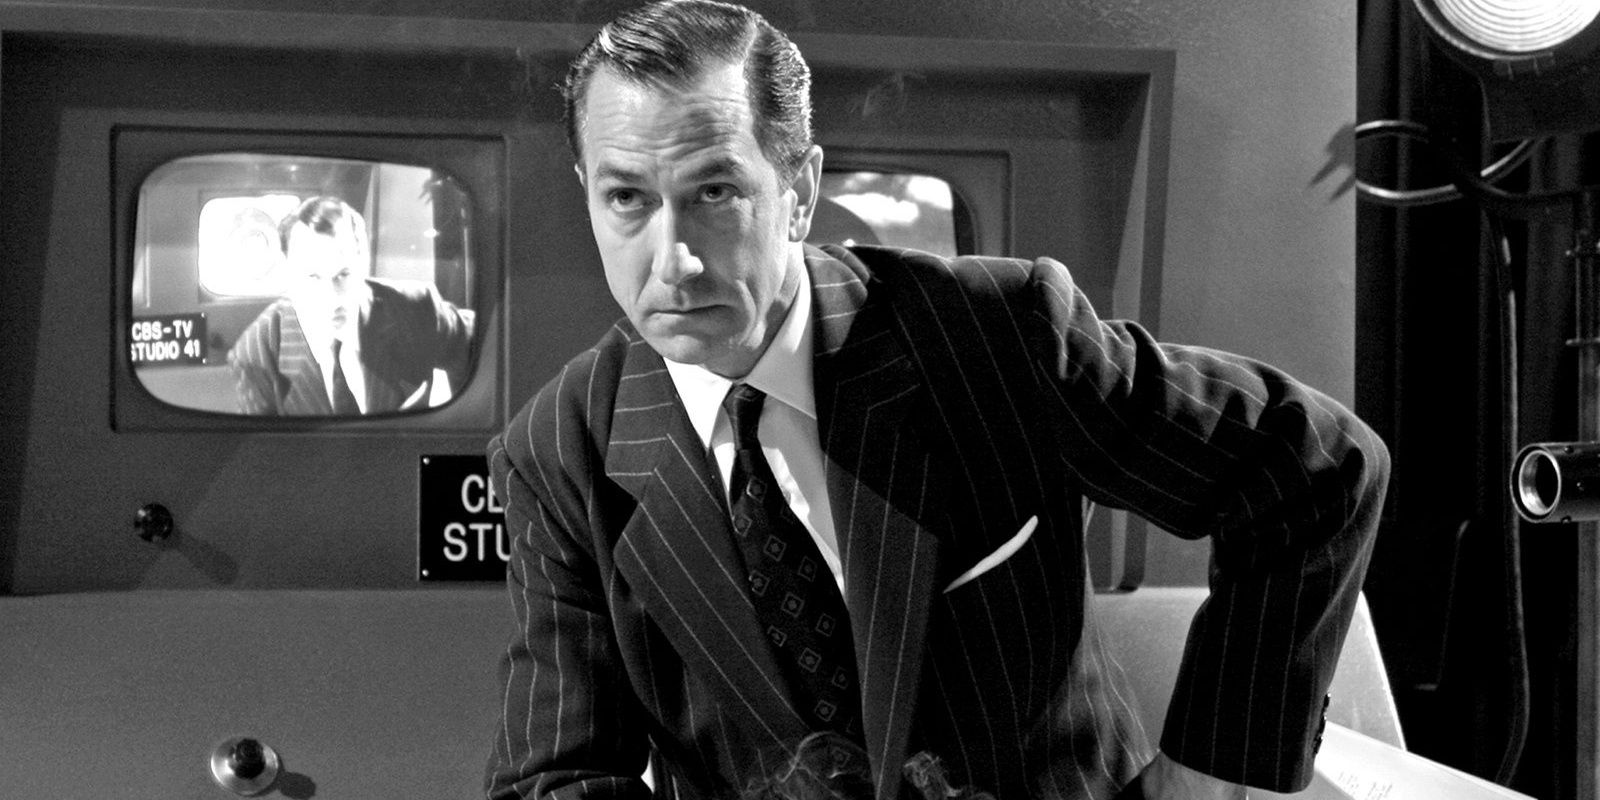 7 Best Movies About The Infamous Hollywood Blacklist Ranked